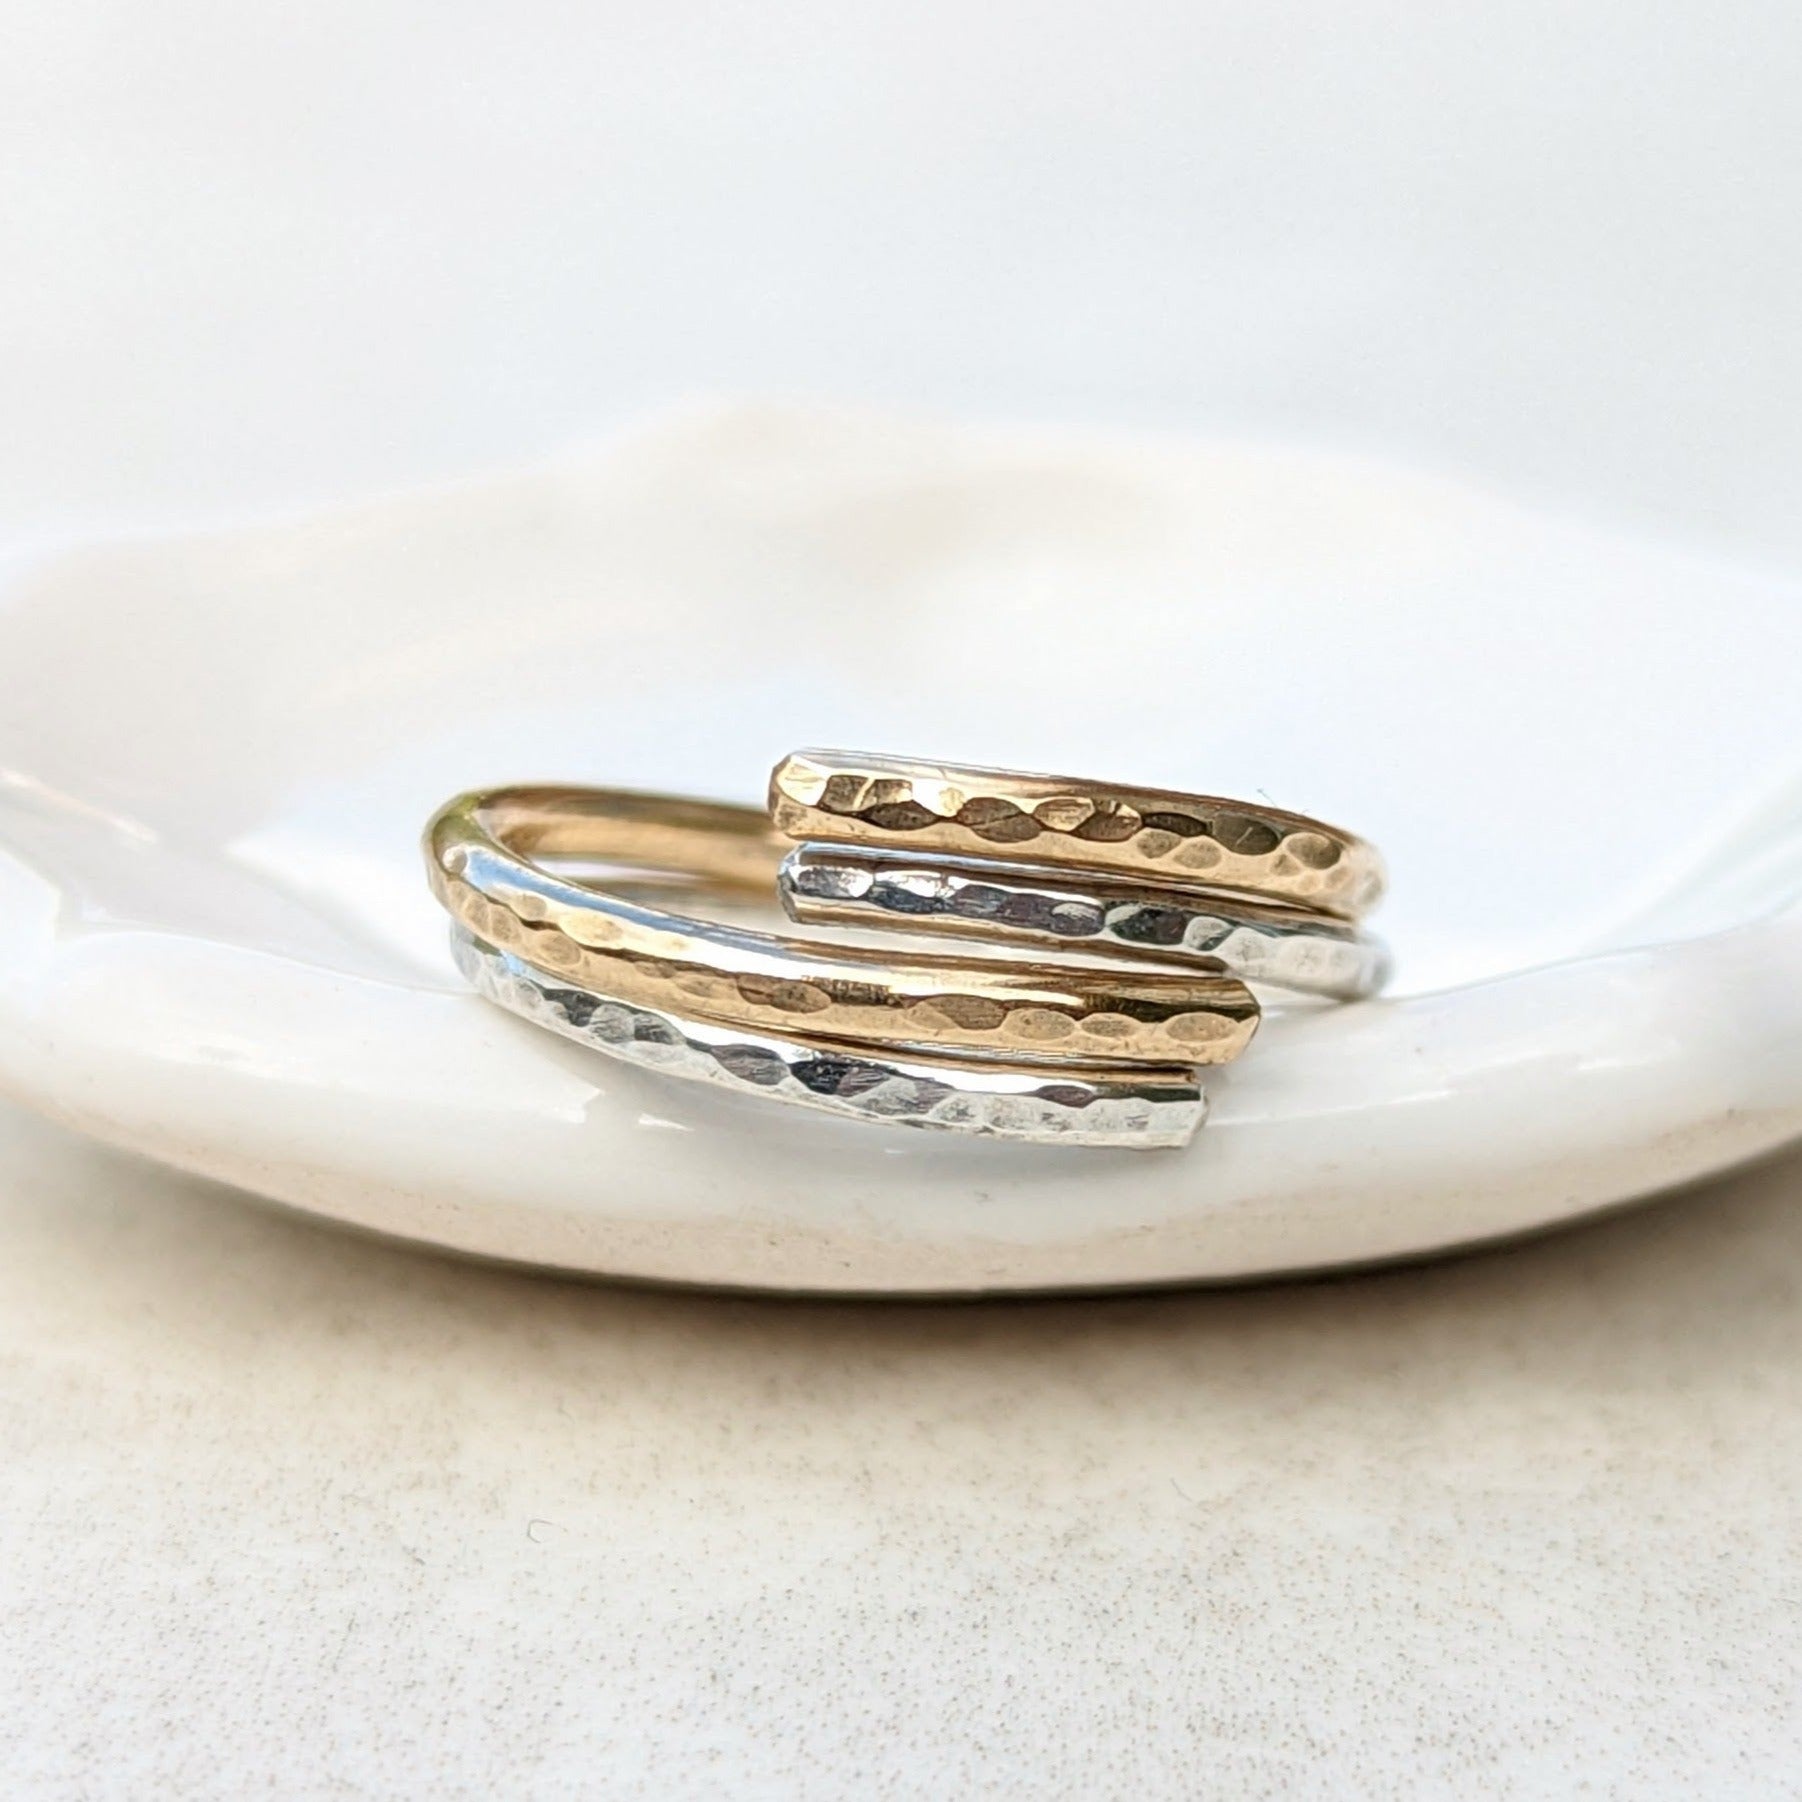 Intertwined gold and silver hammered ring stack on a trinket dish